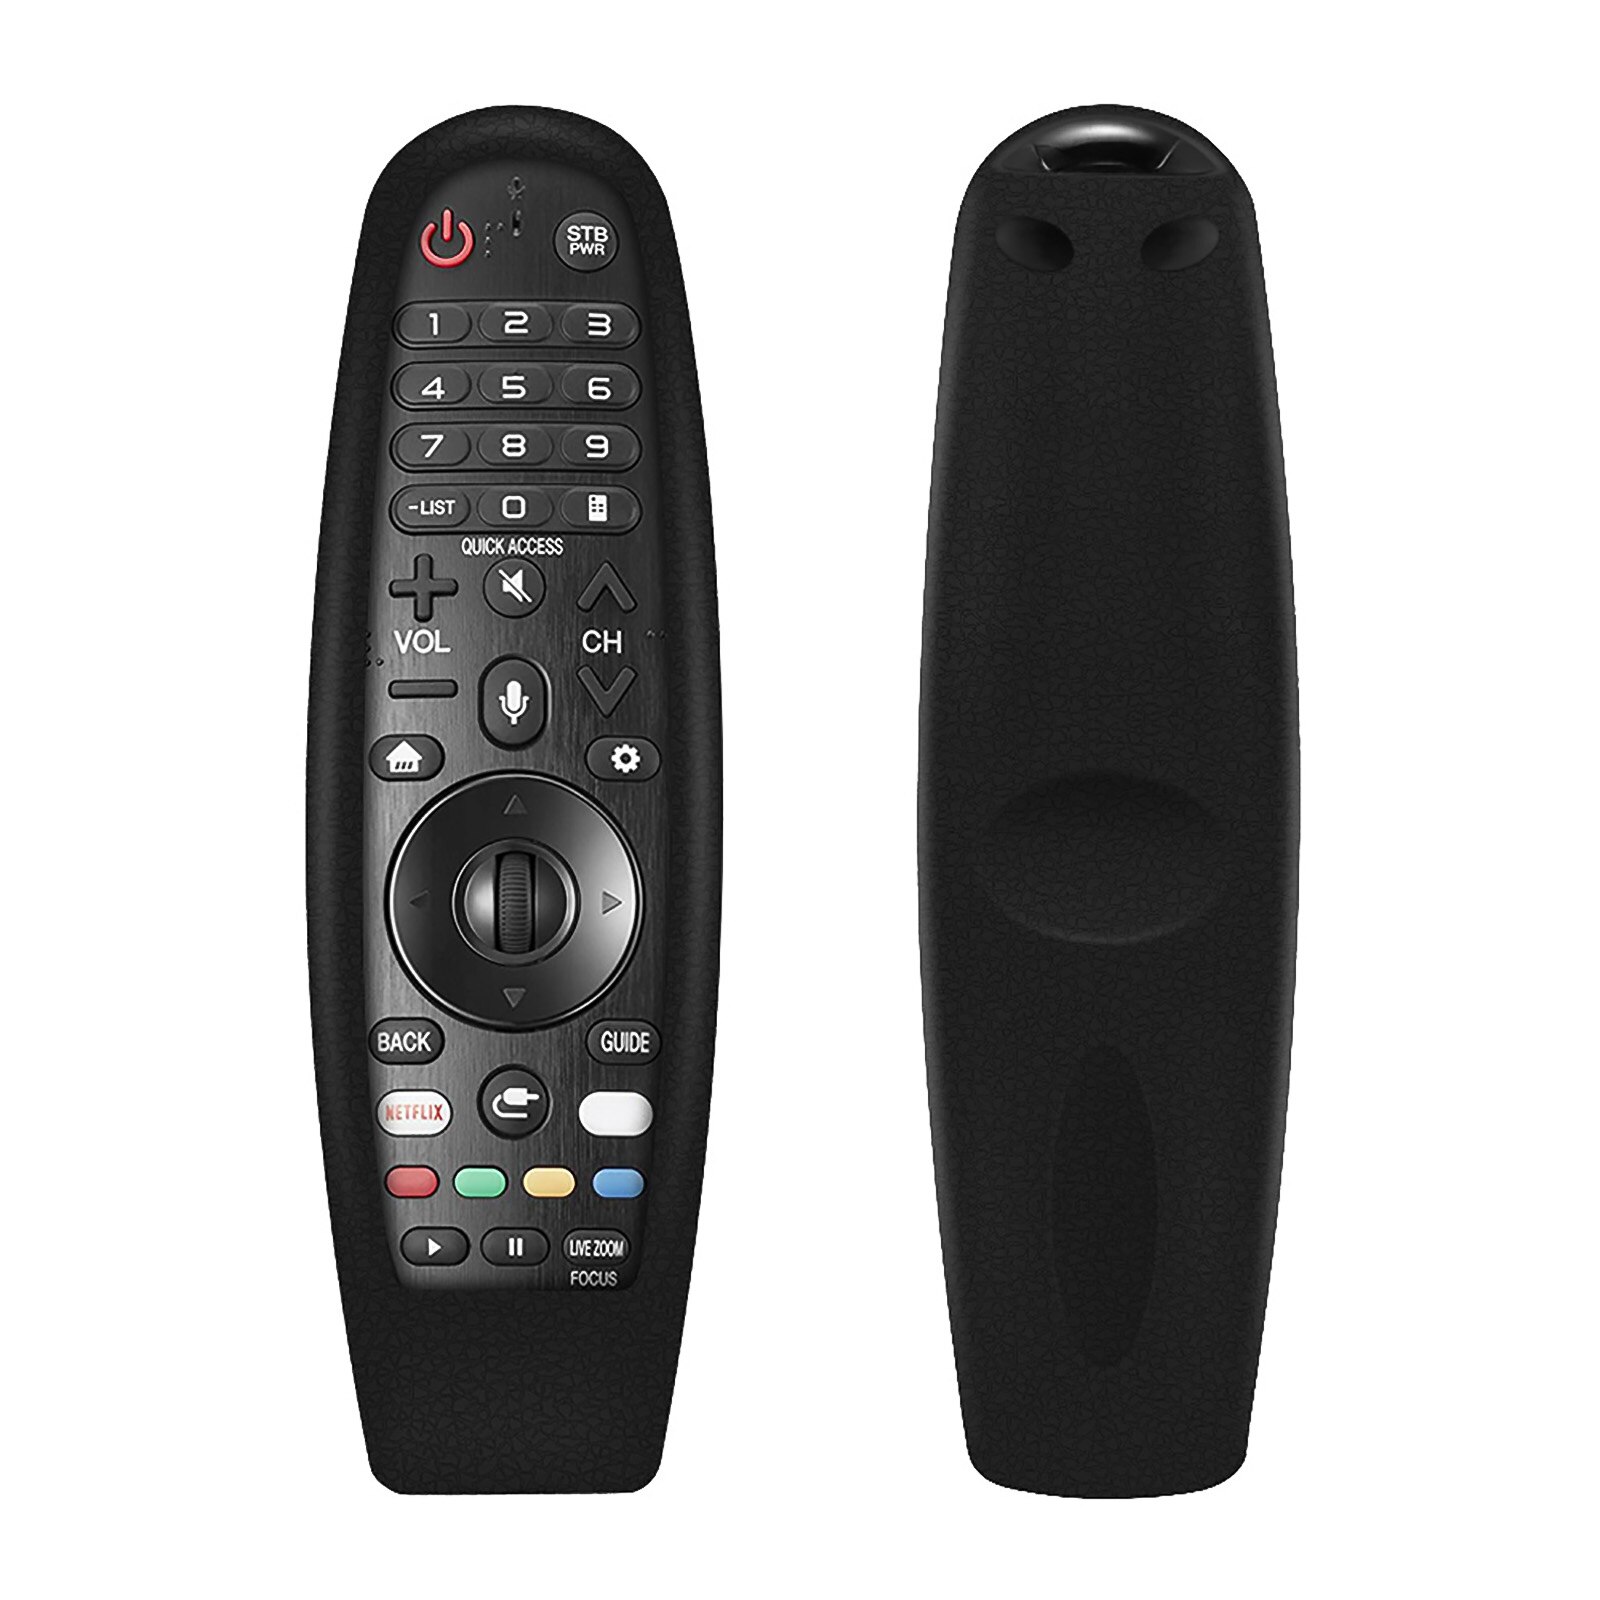 Protective Silicone Case For LG TV AN-MR600 650 AN-MR18BA MR19BA Magic Remote Control Cover Shockproof Washable Remote MR-18: Black